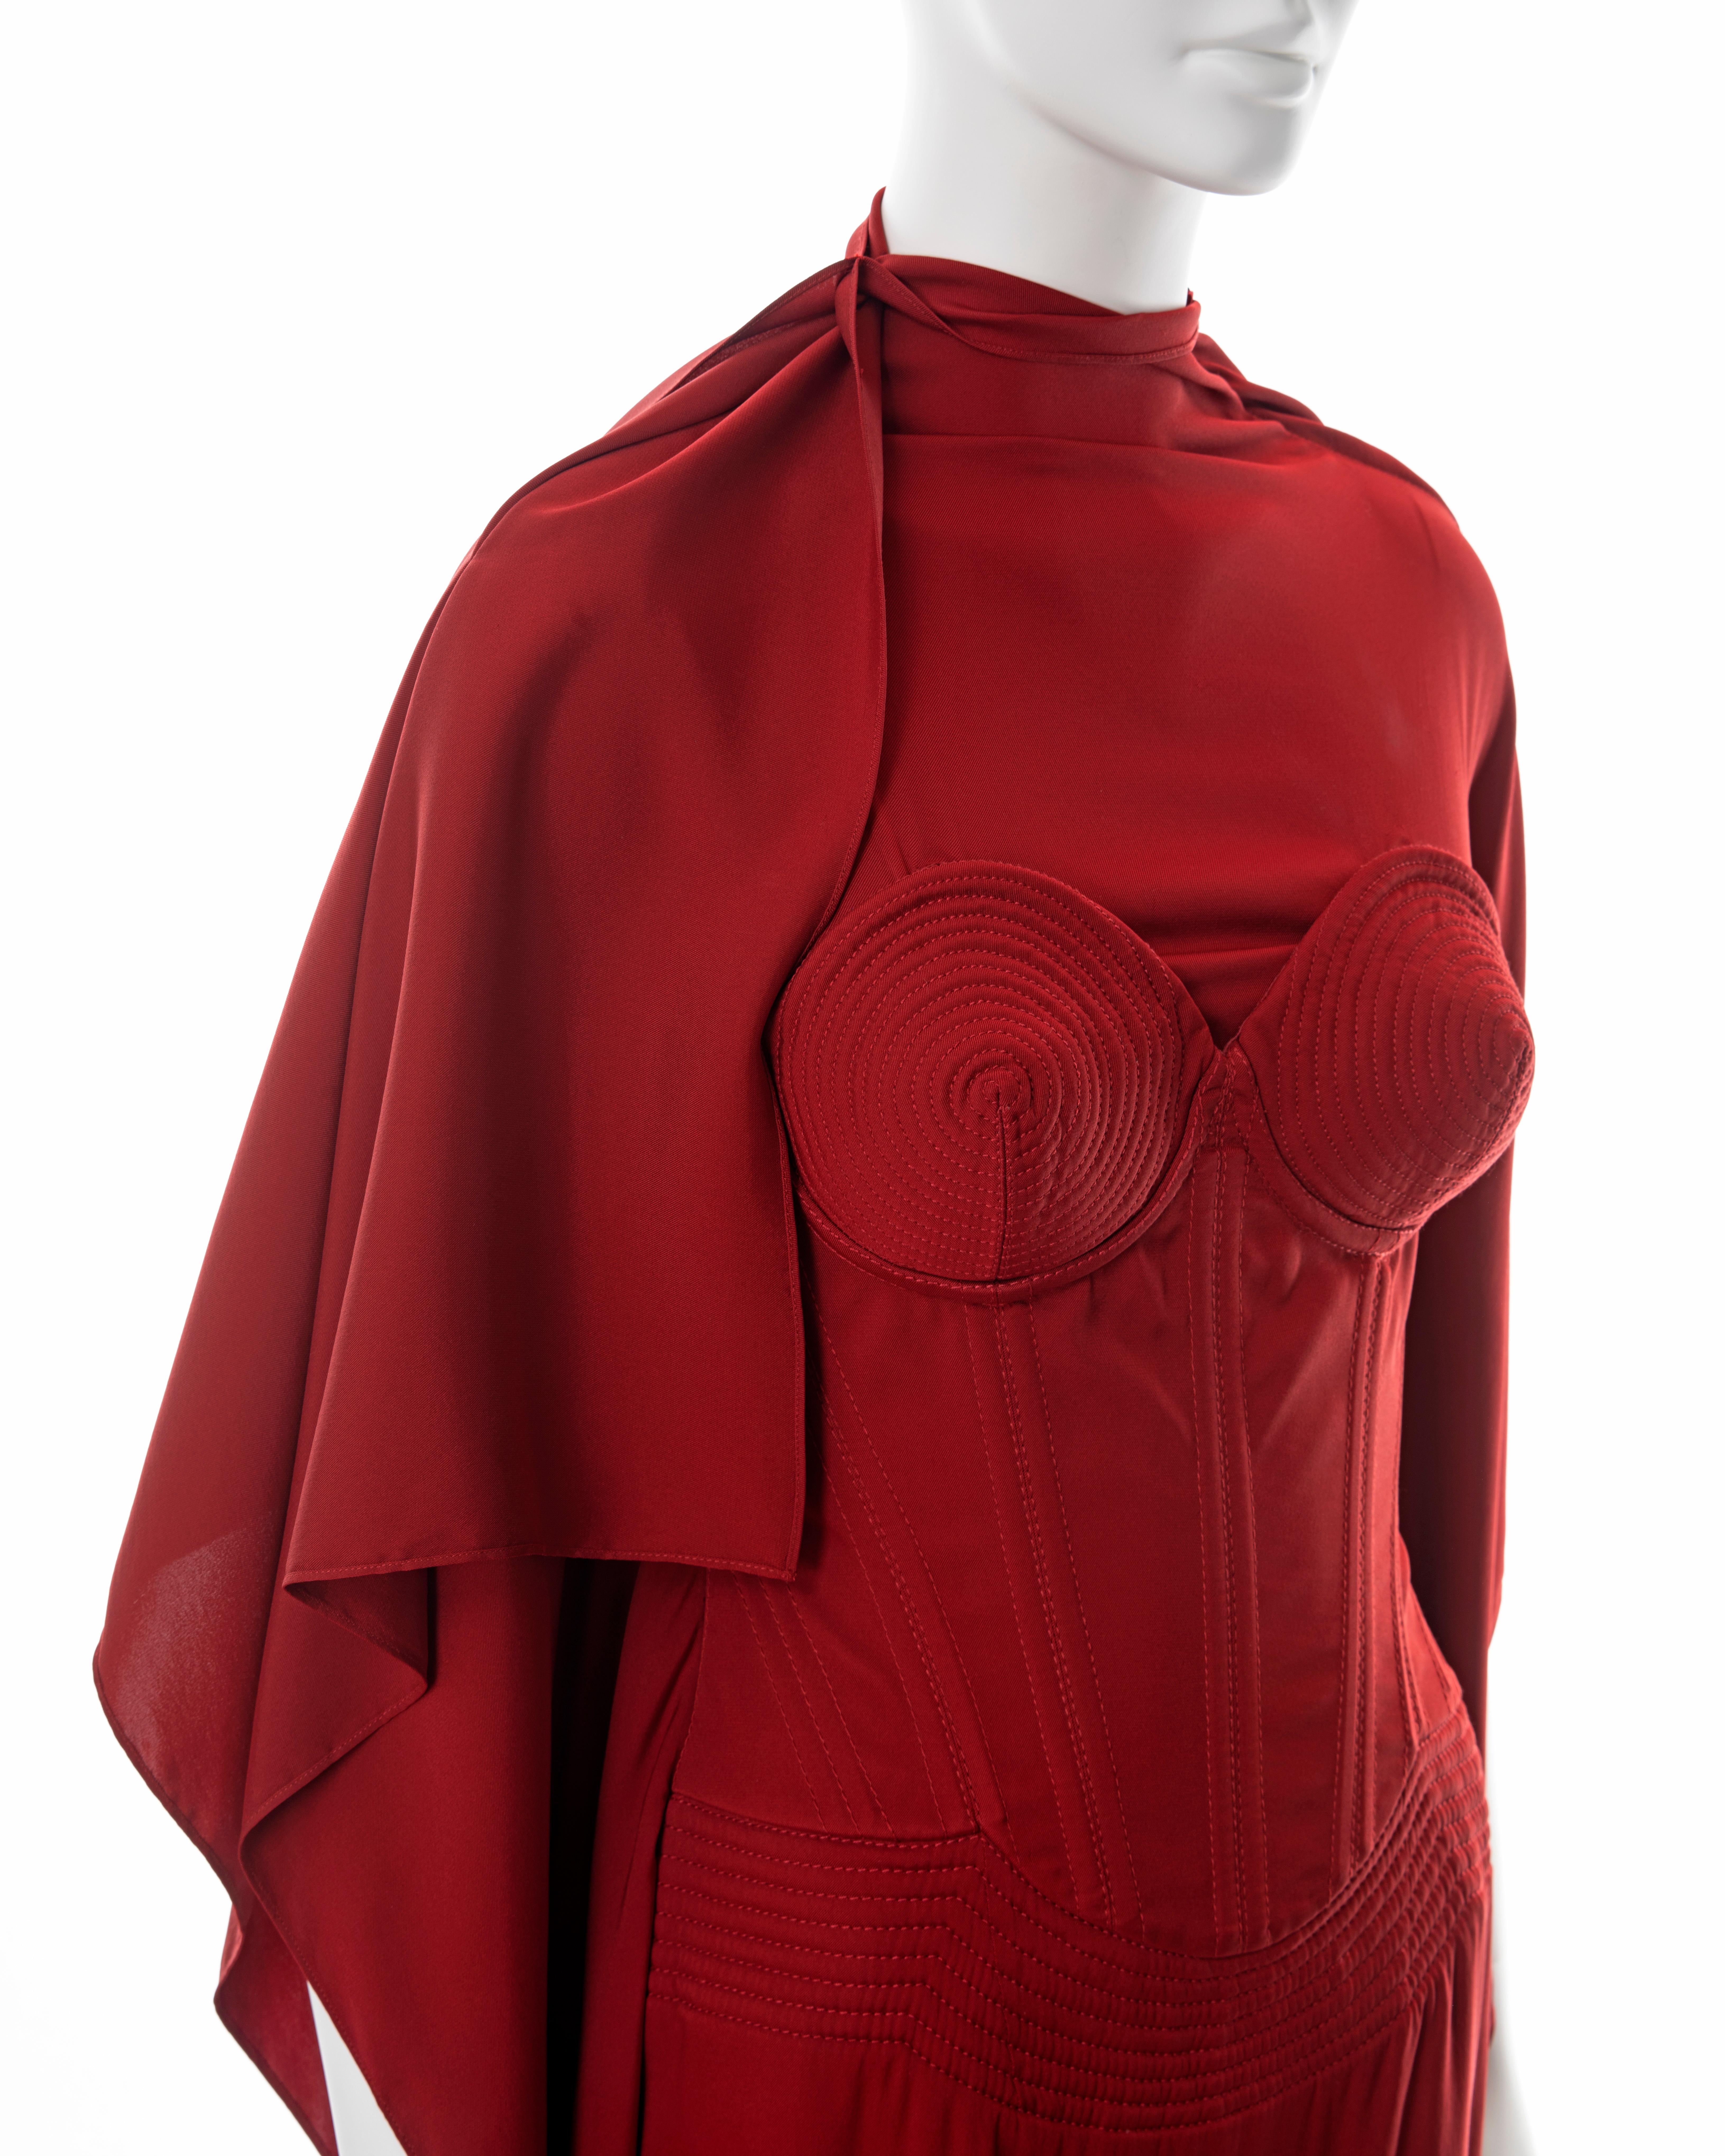 Jean Paul Gaultier red silk dress with built-in cone bra and corset, fw 2010 2